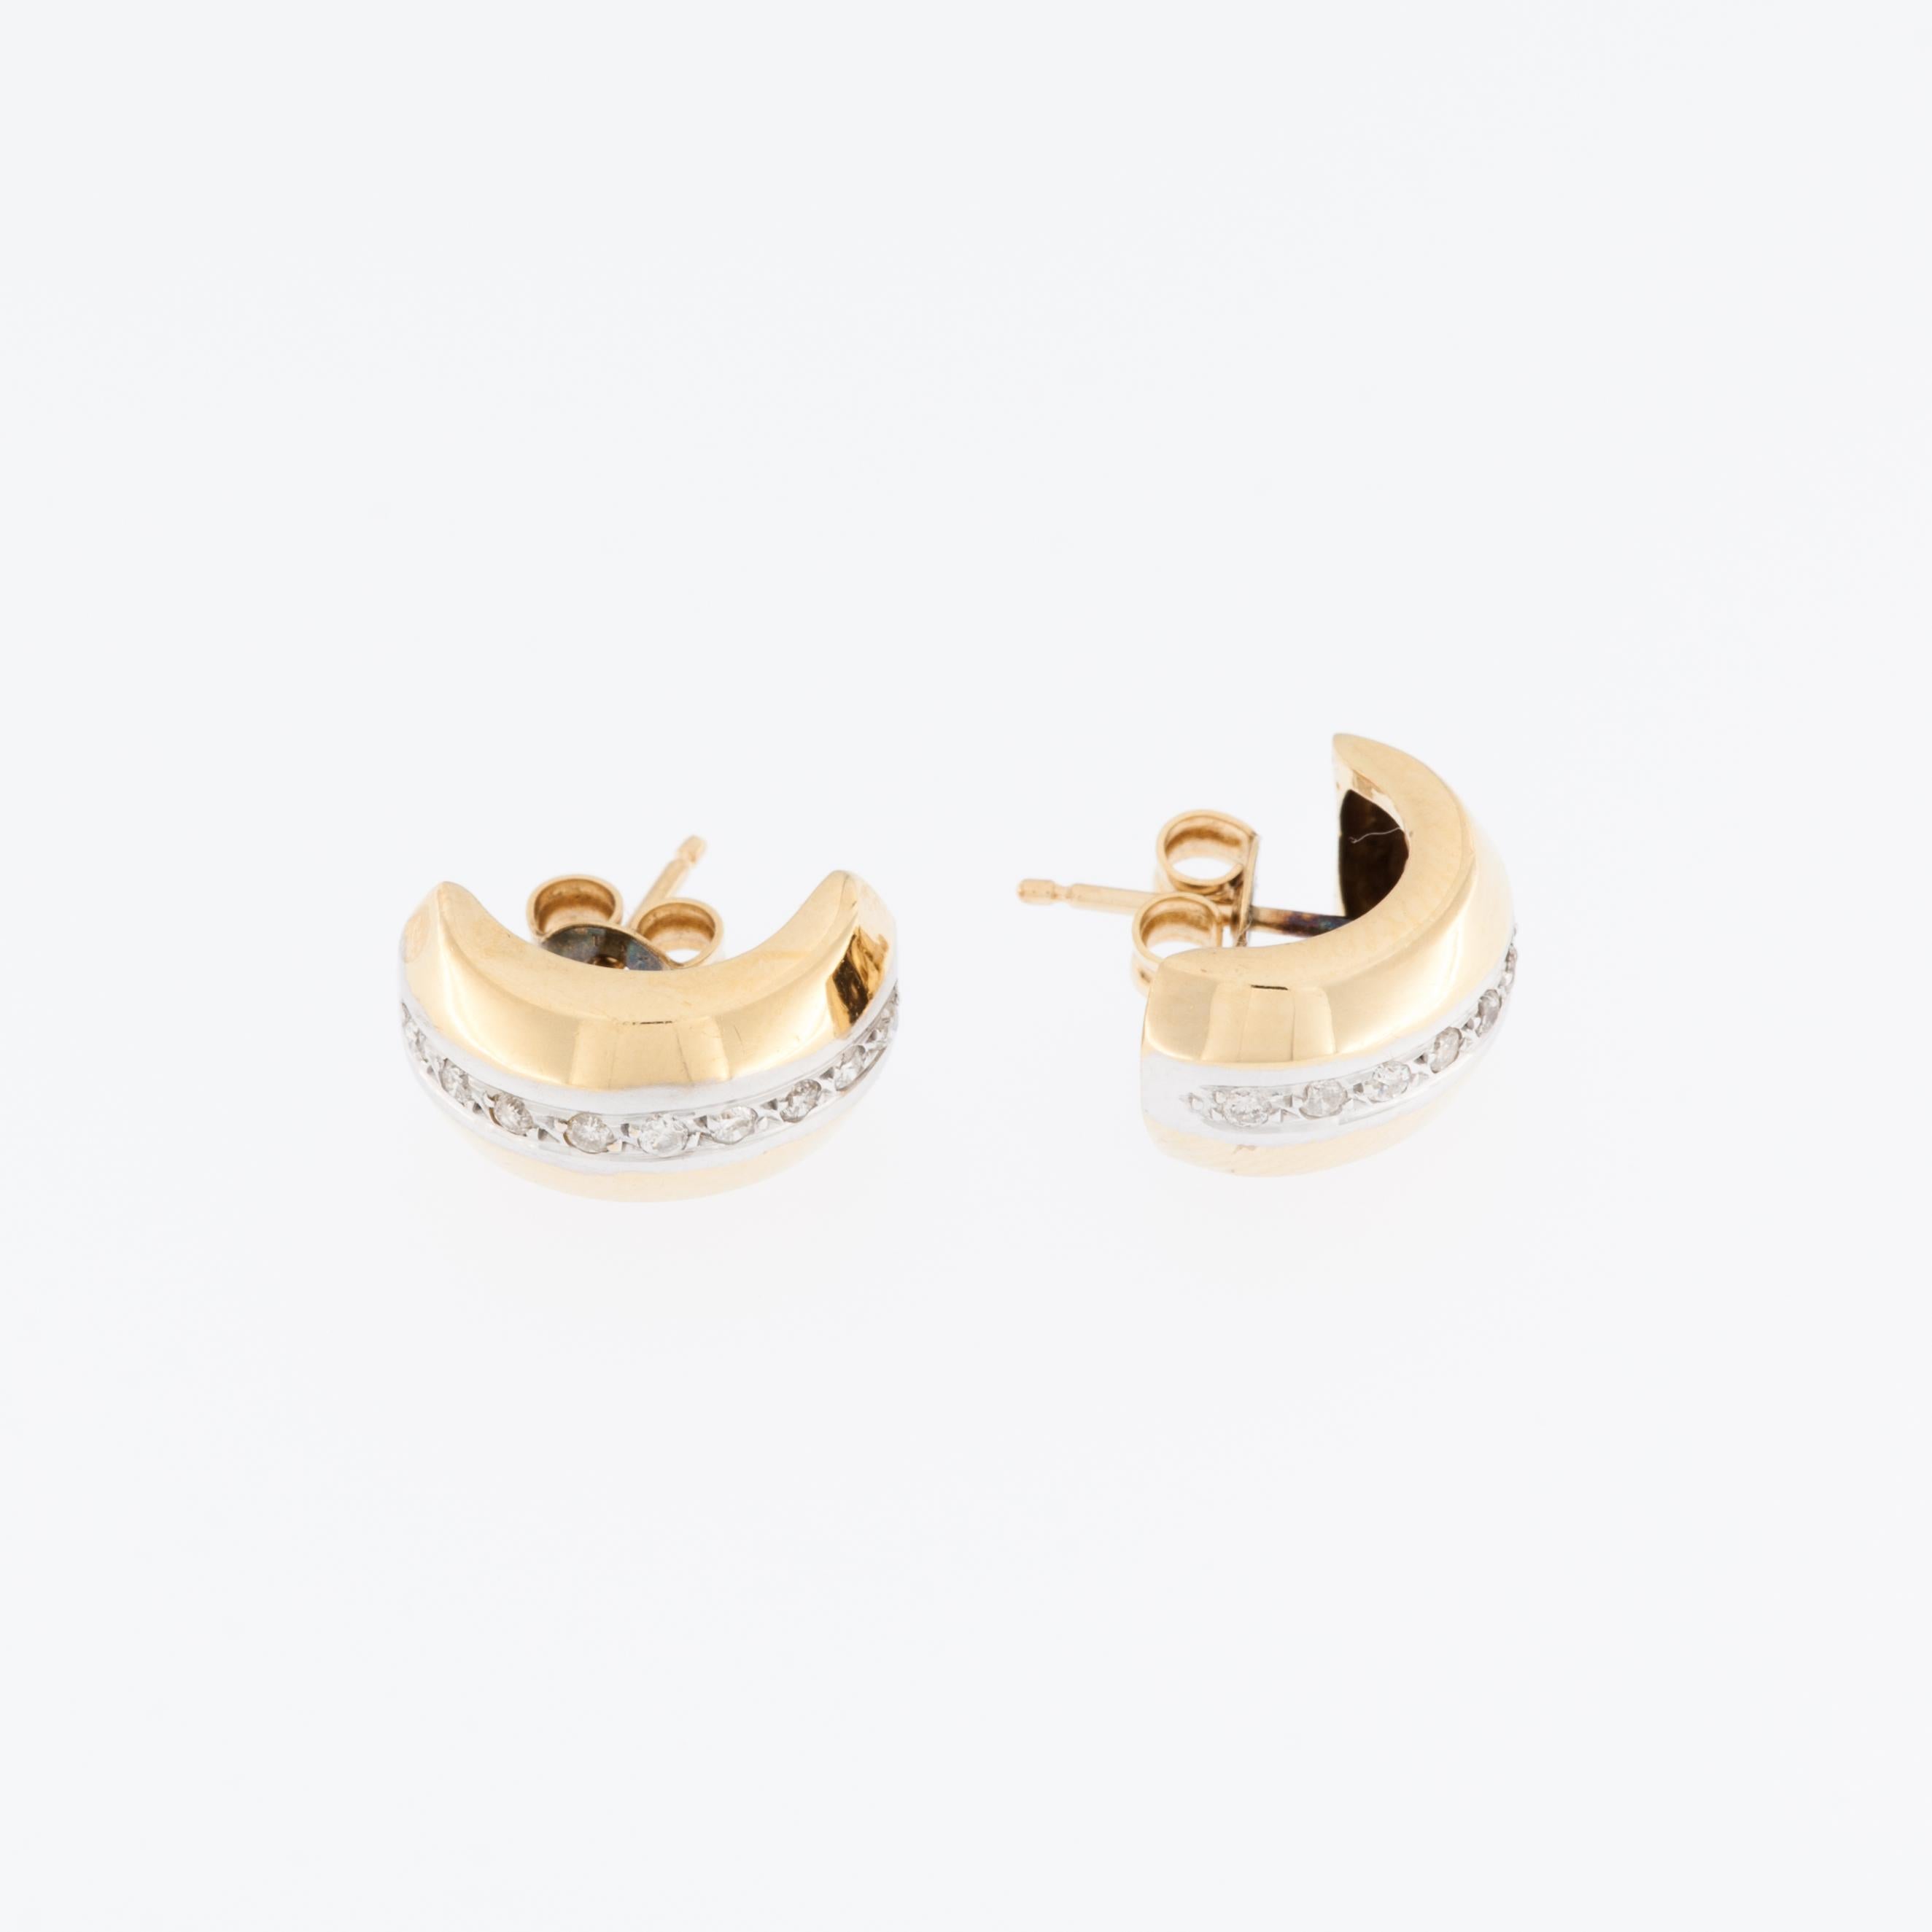 The Swiss 18kt Yellow and White Gold Earrings with Diamonds are a luxurious and exquisite jewelry item that combines the timeless beauty of gold with the dazzling sparkle of diamonds. 

These earrings are crafted from a high-quality blend of 18kt